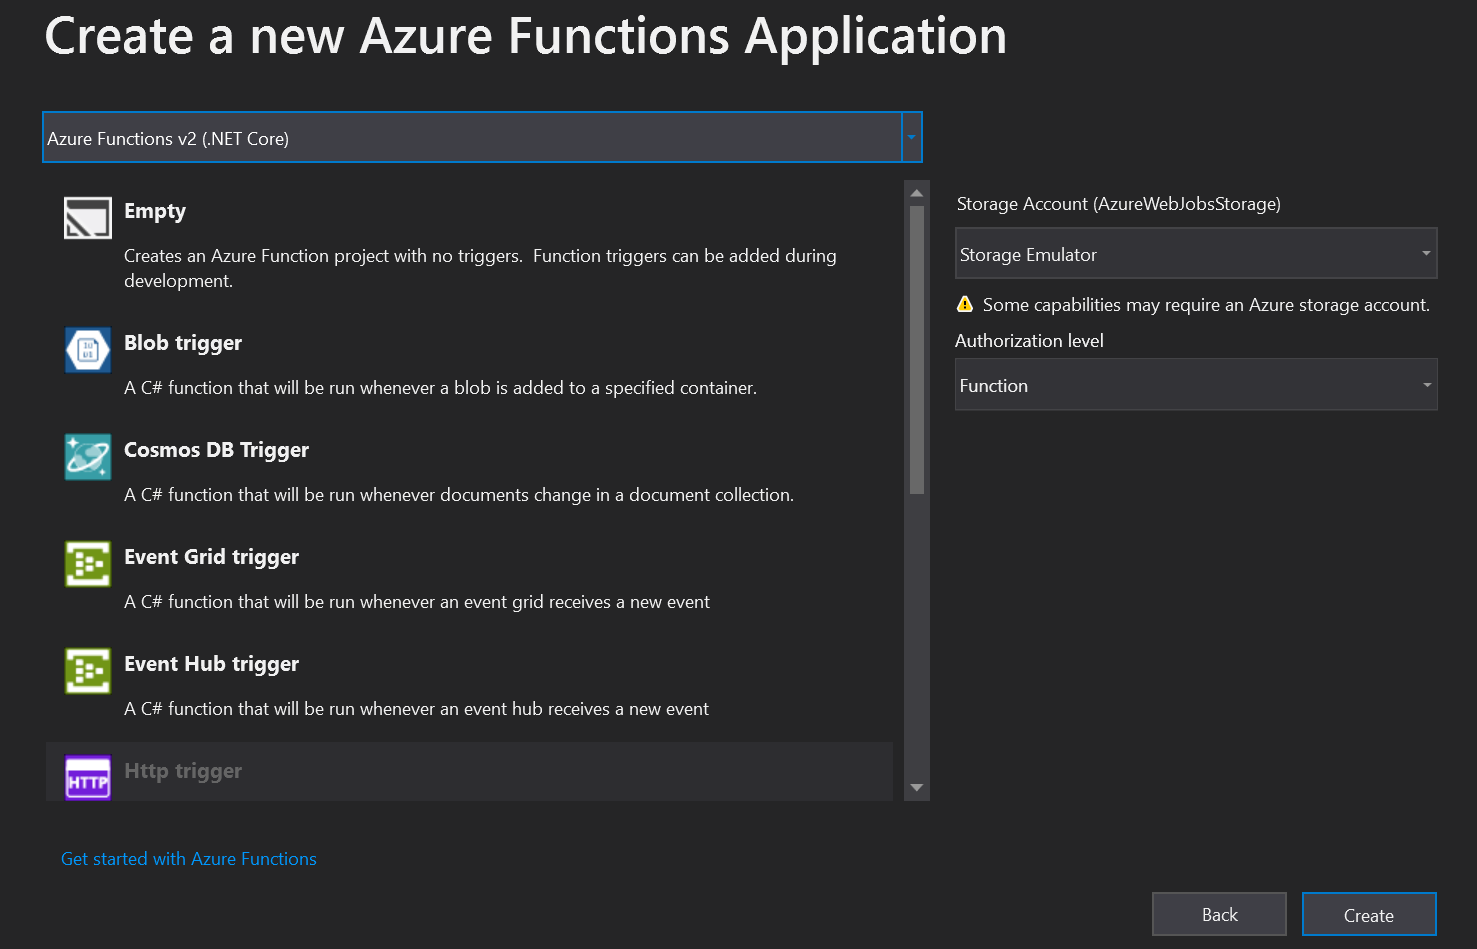 Configurations for Azure Functions - triggers, storage and authentication